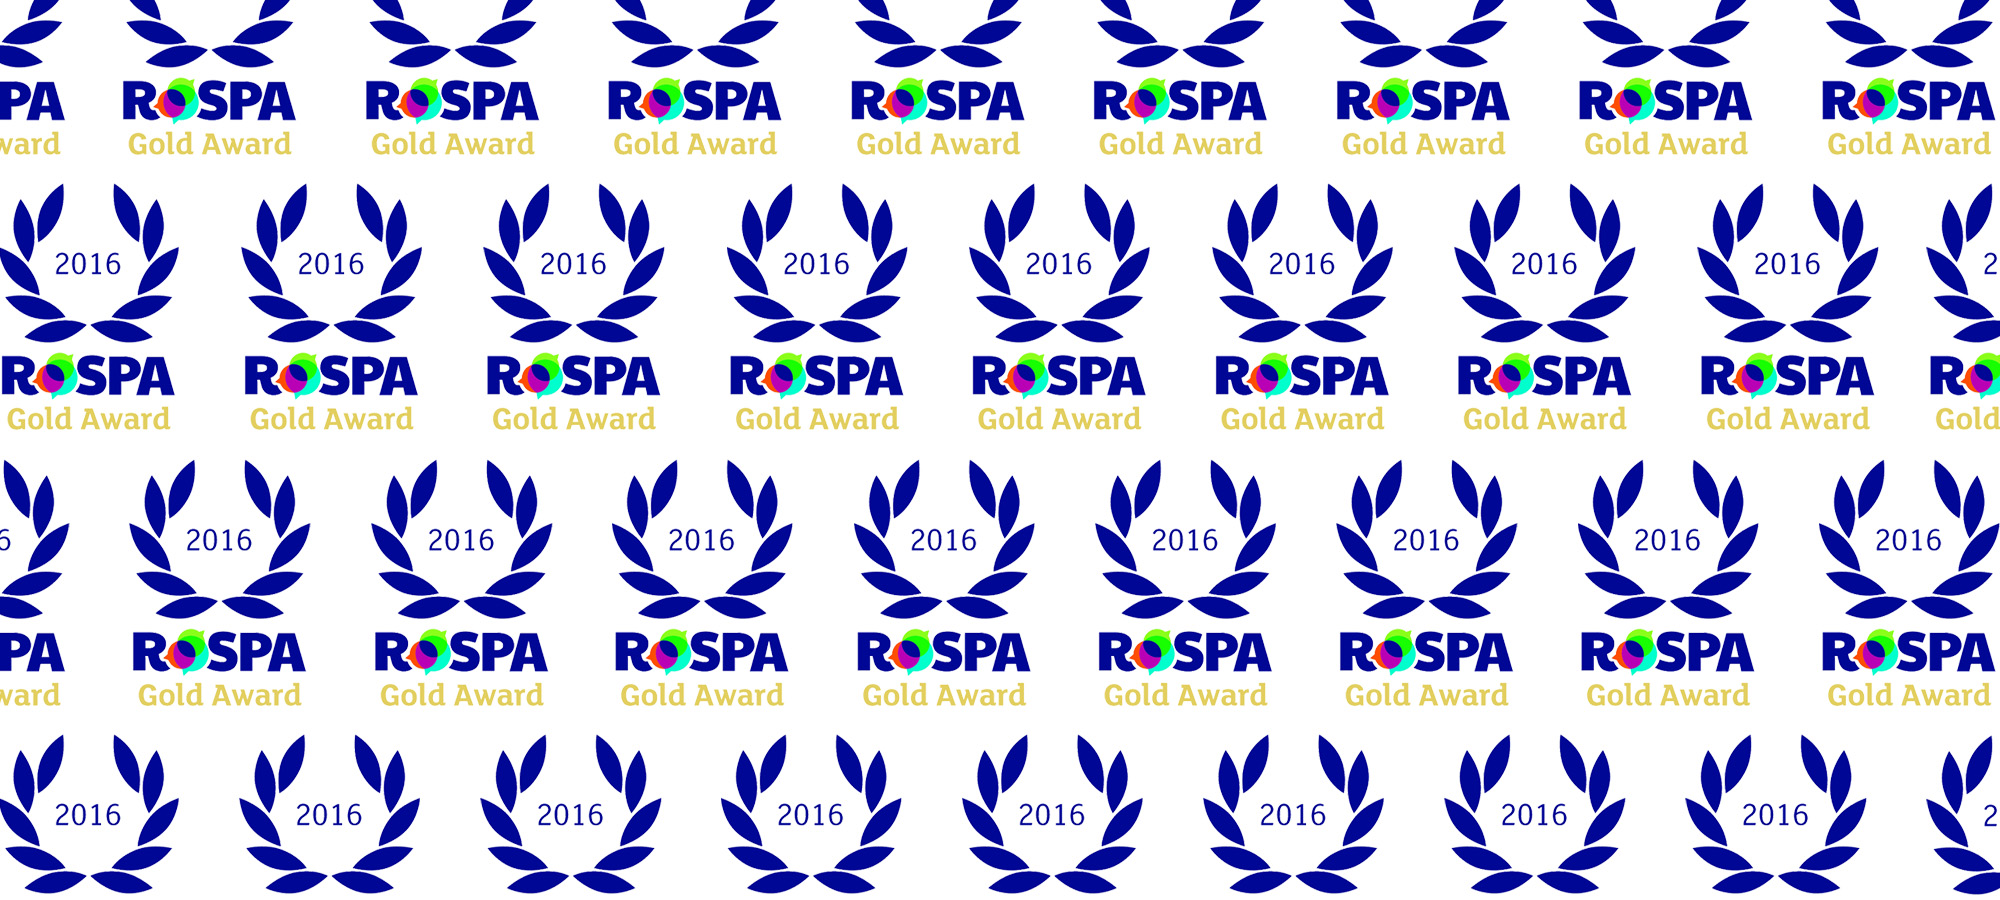 Structure Tone UK wins Gold at the RoSPA Awards 2016